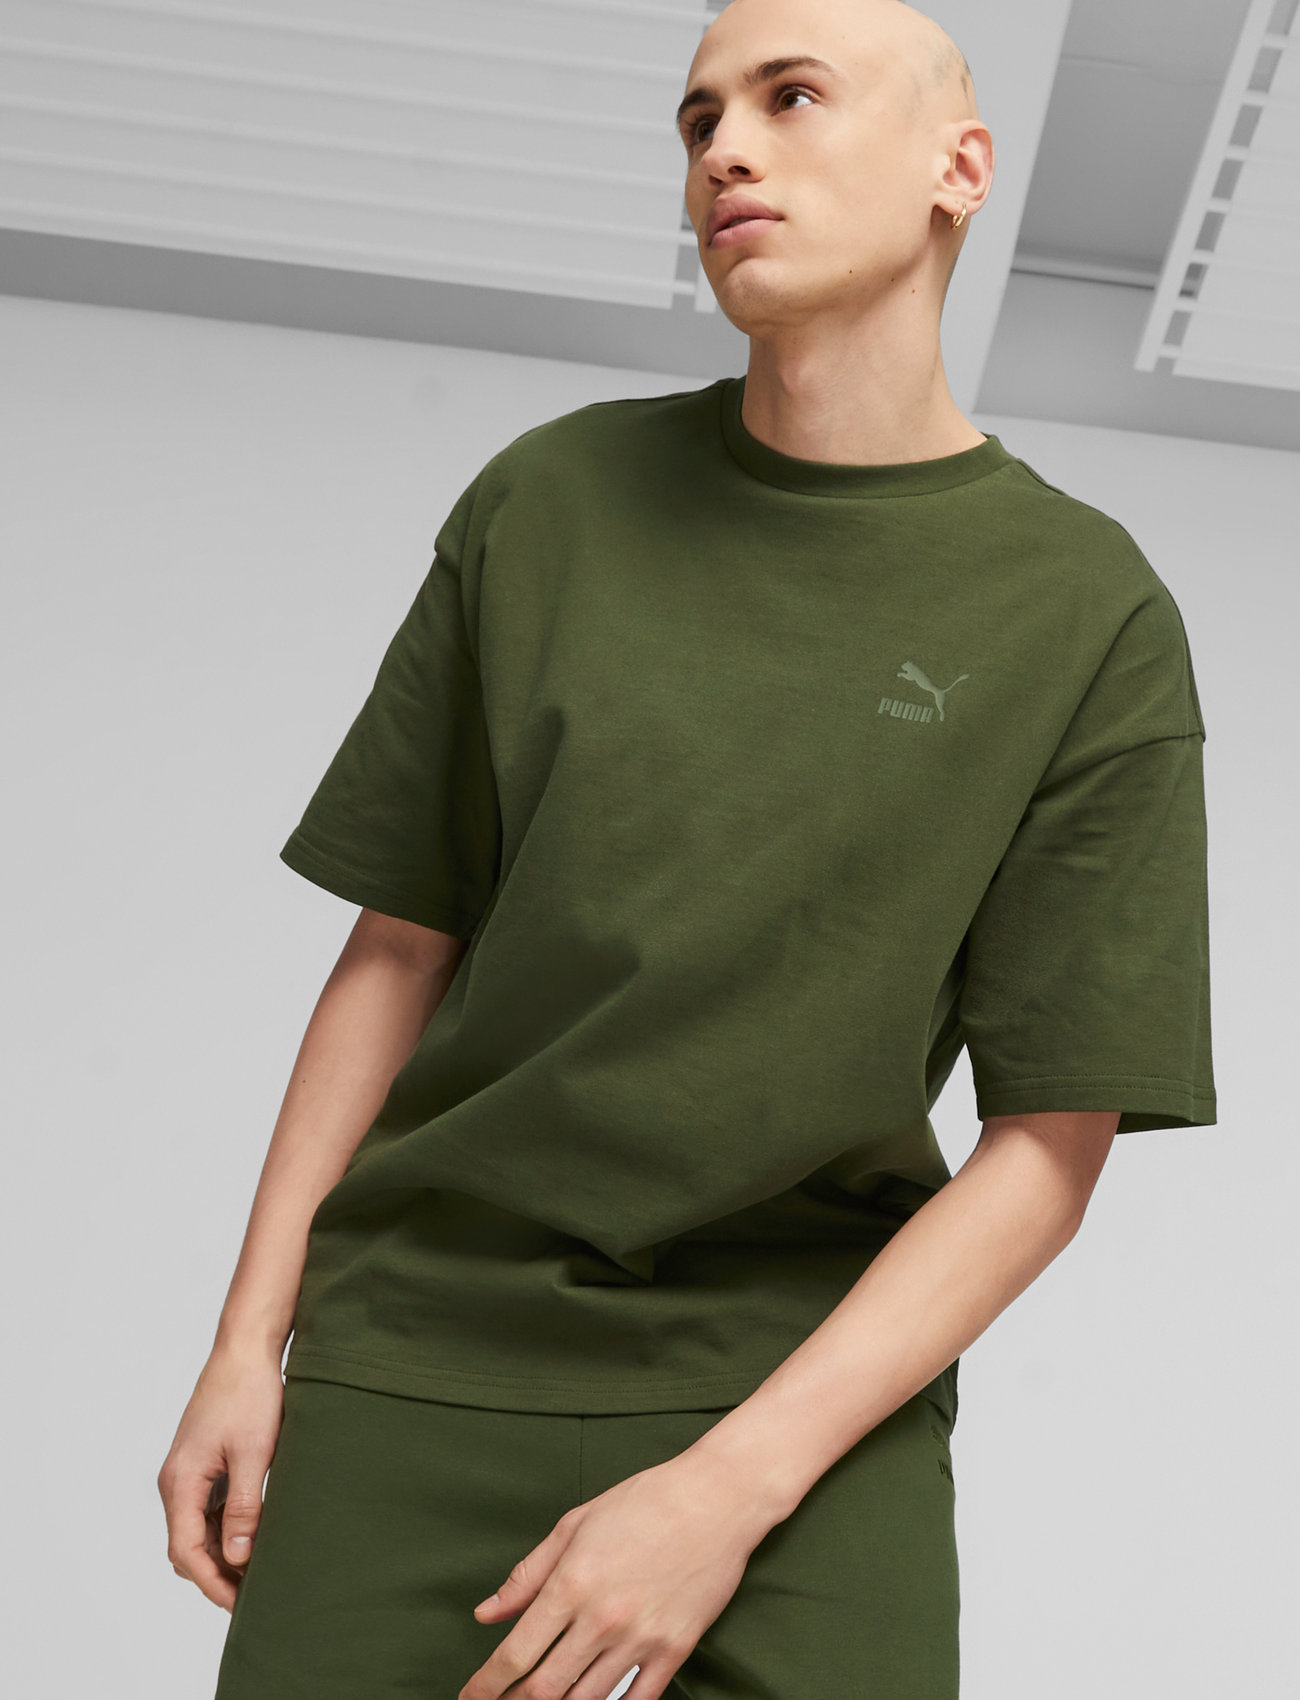 PUMA - BETTER CLASSICS Oversized Tee - clothes - myrtle - 0